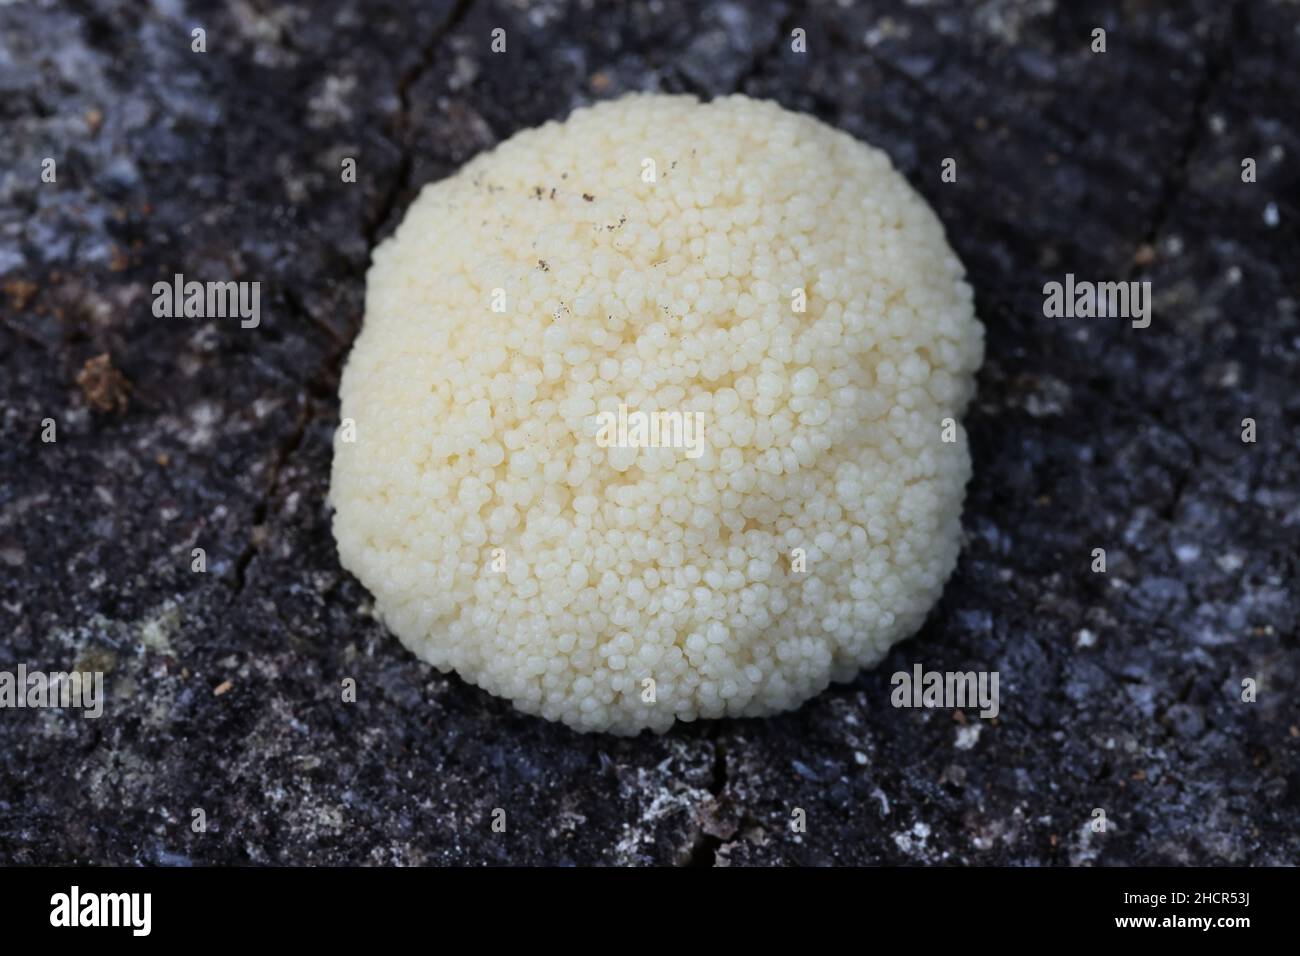 Amaurochaete atra, a slime mold from Finland with no common eglish name Stock Photo